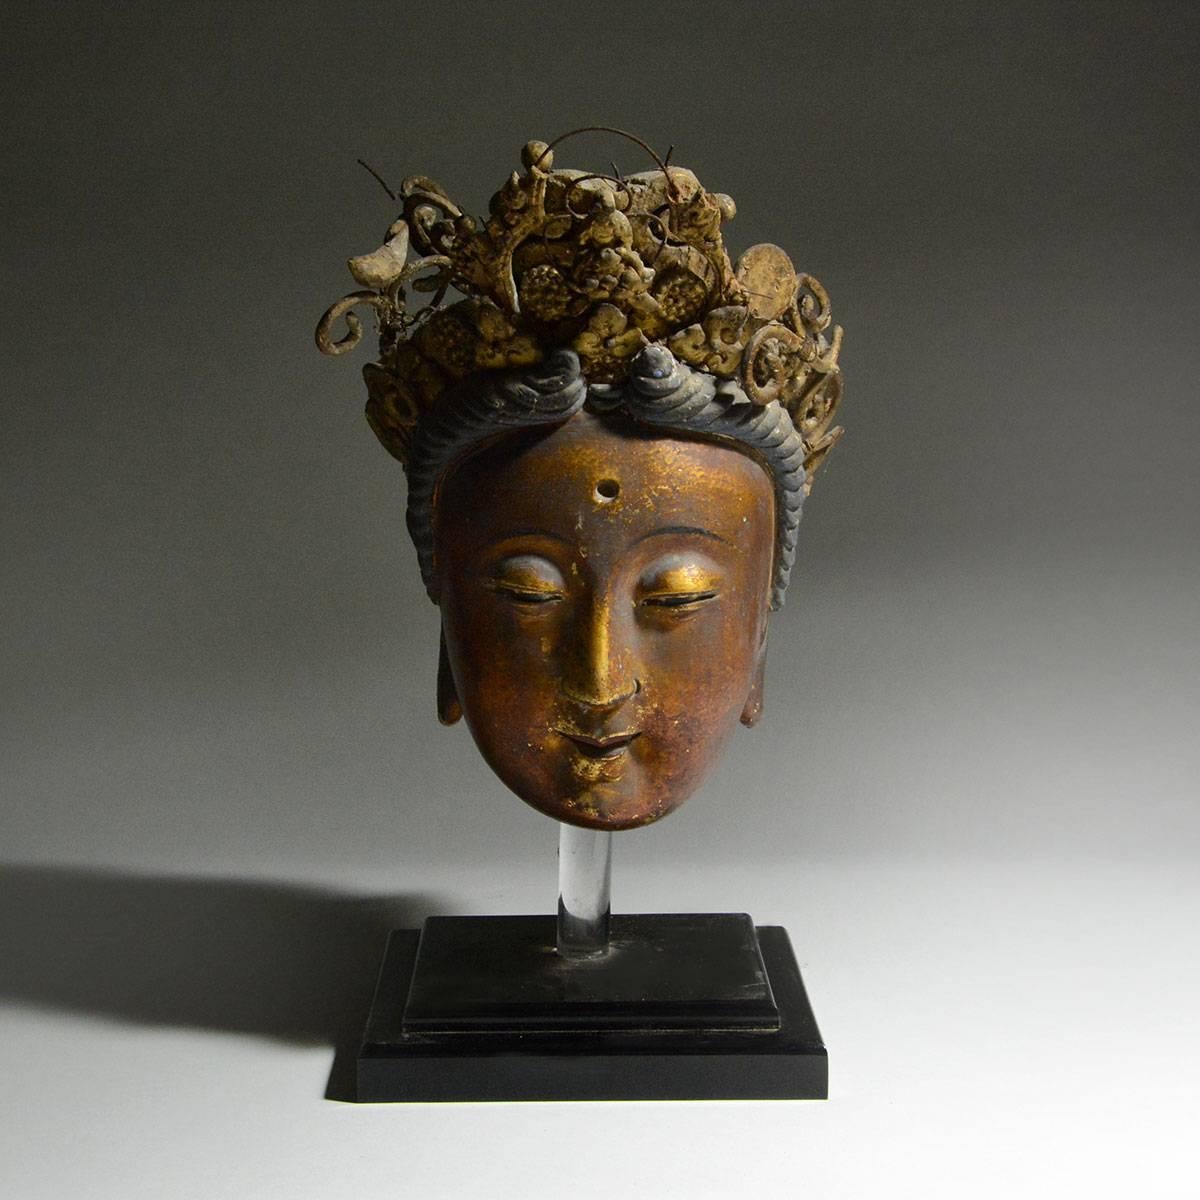 Cast in exquisite detail, this sculpture of Kuan-Yin is applied with red and black lacquer and gilt in the face and black and blue pigment in the headdress. Her oval face, aquiline nose, pursed lips, and delicately shaped downcast eyes make up her